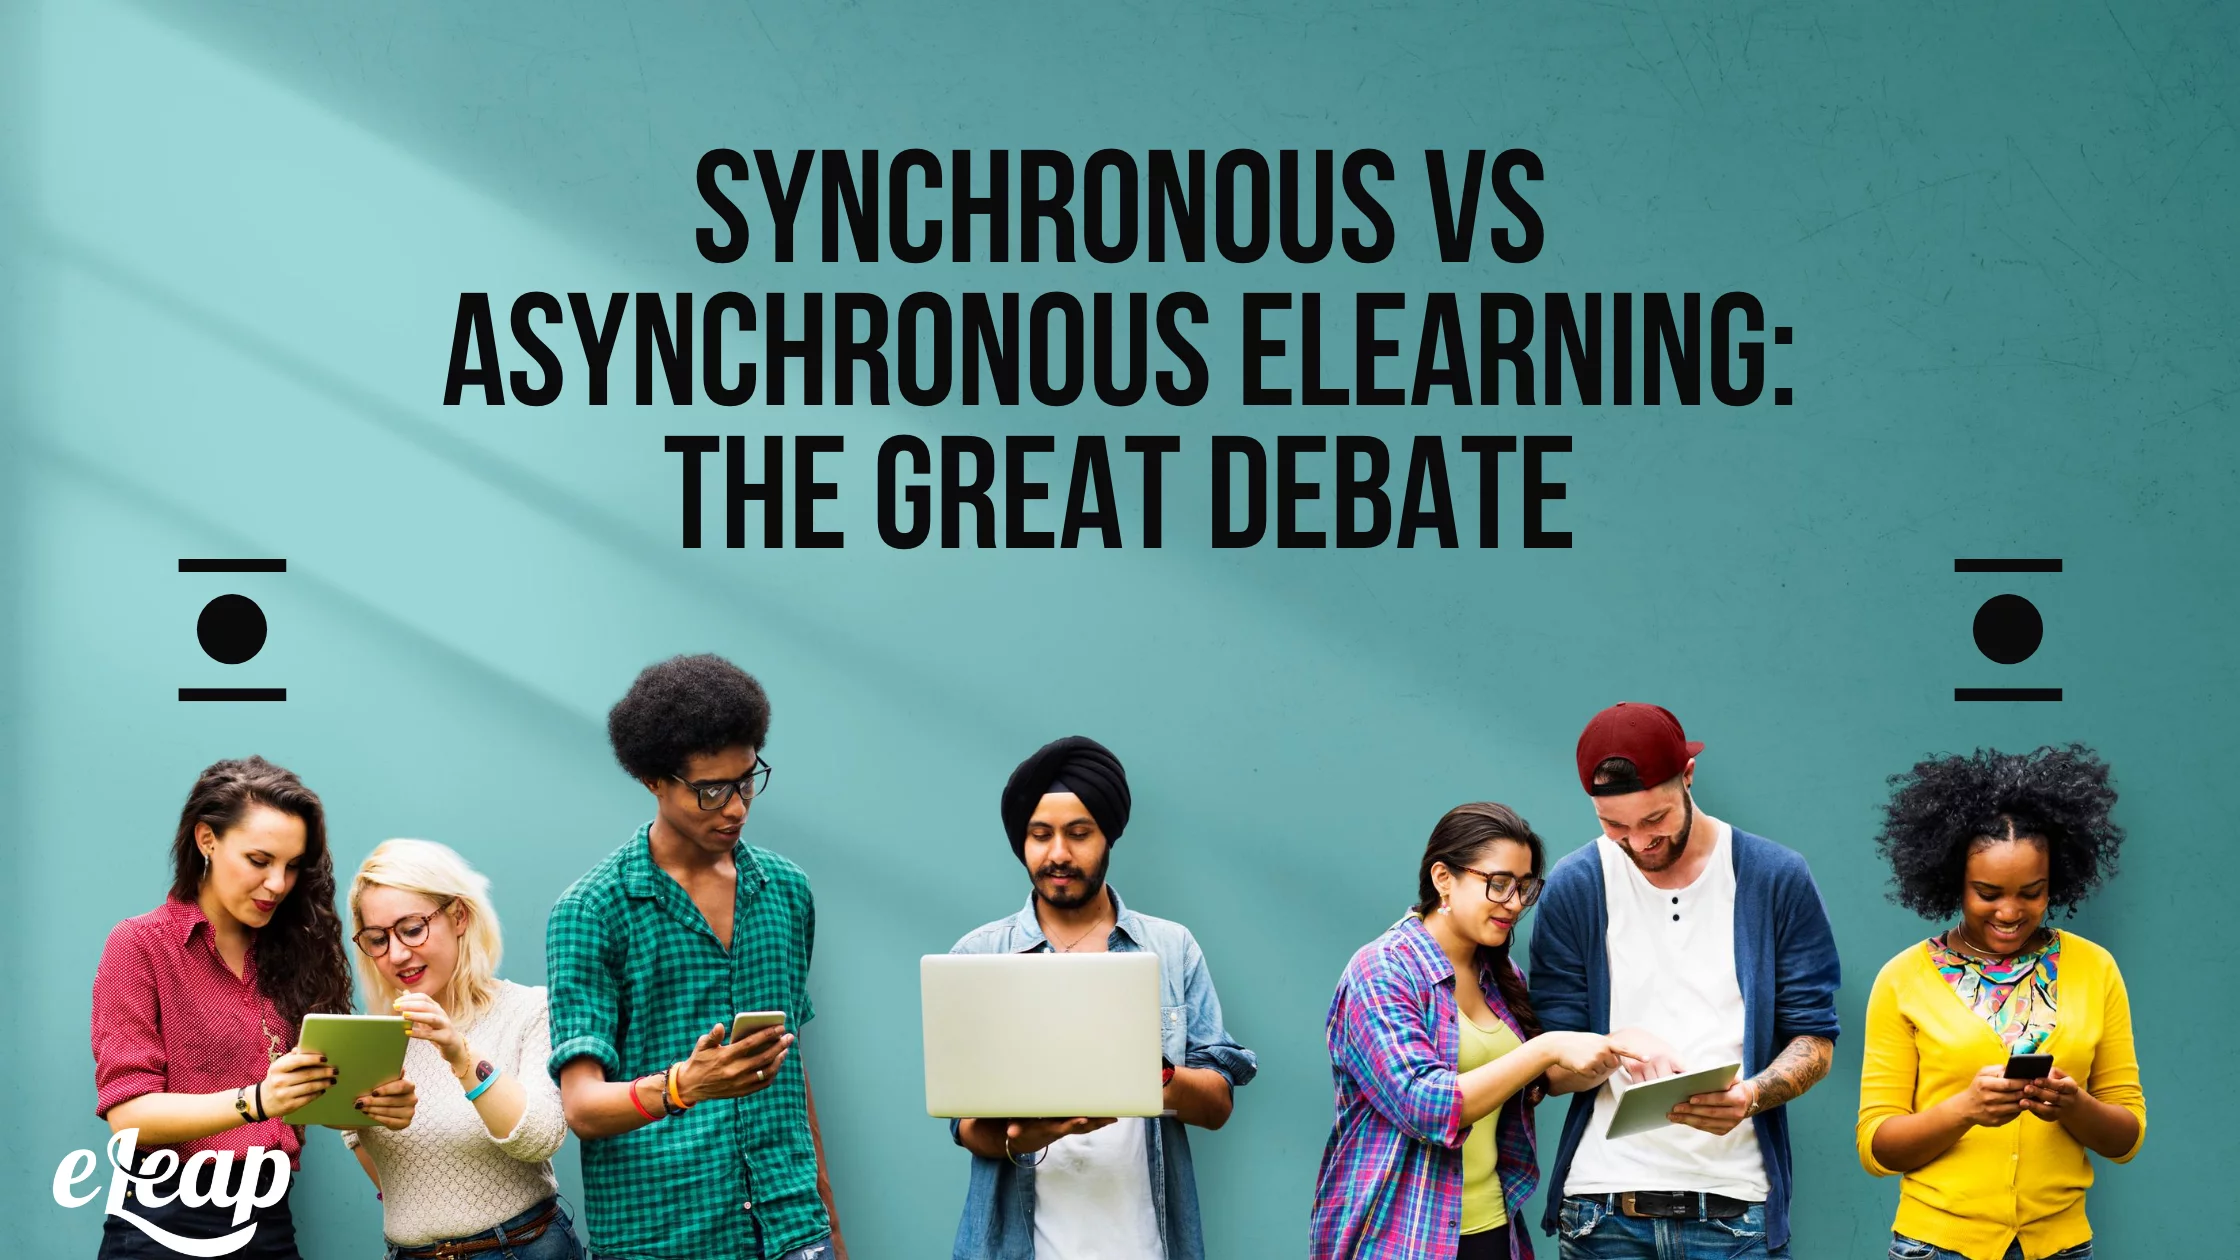 Synchronous vs Asynchronous eLearning: The Great Debate